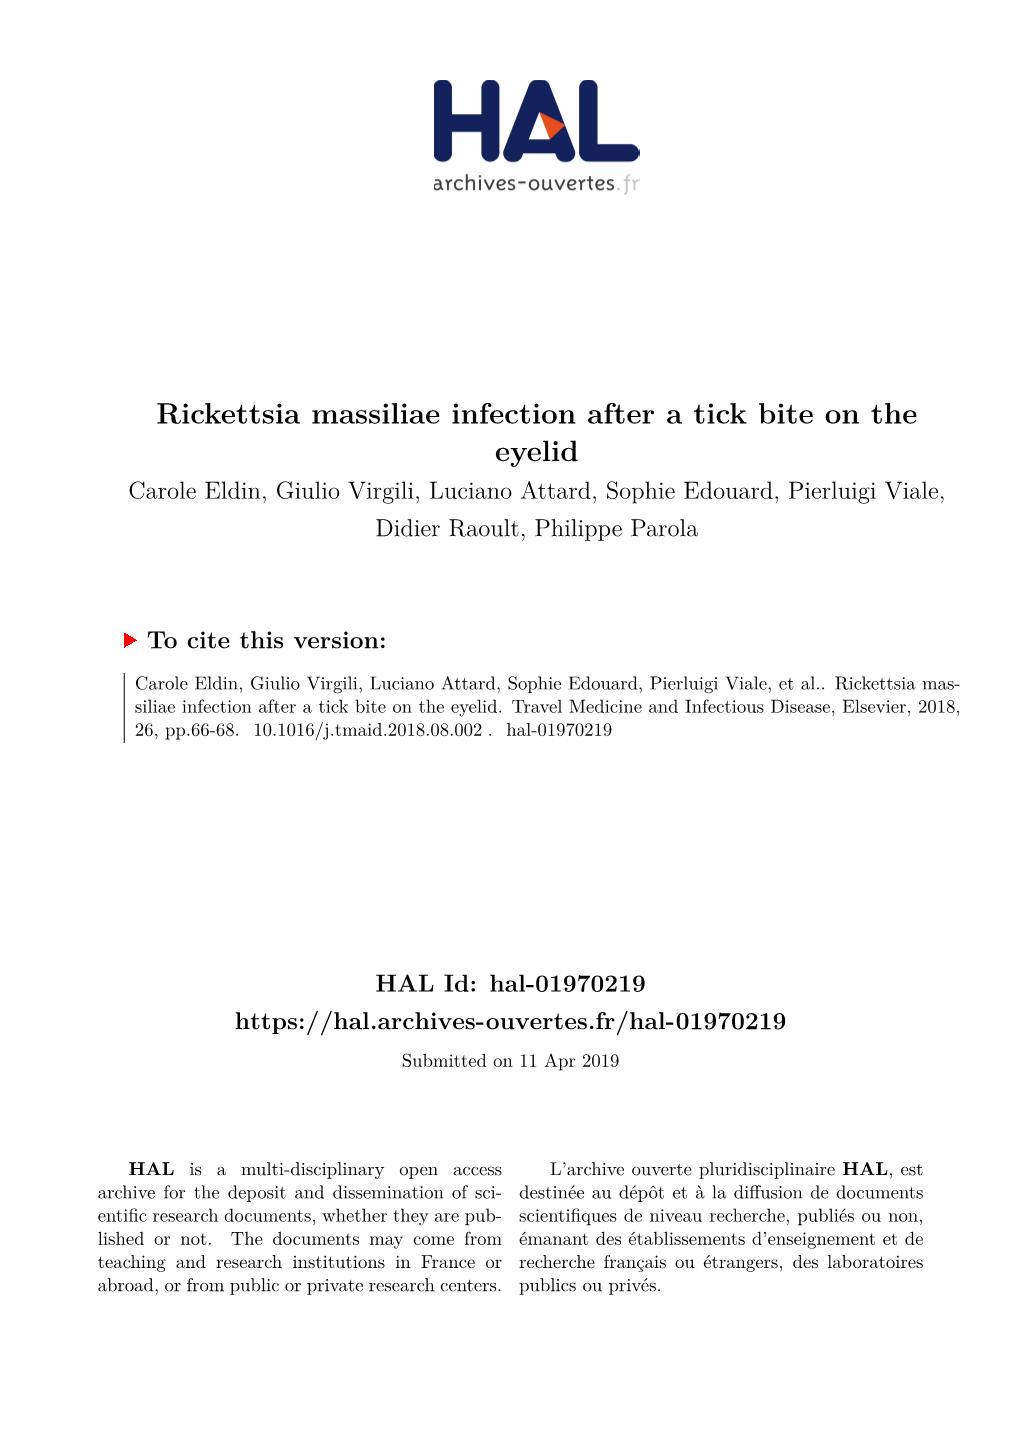 Rickettsia Massiliae Infection After a Tick Bite on the Eyelid